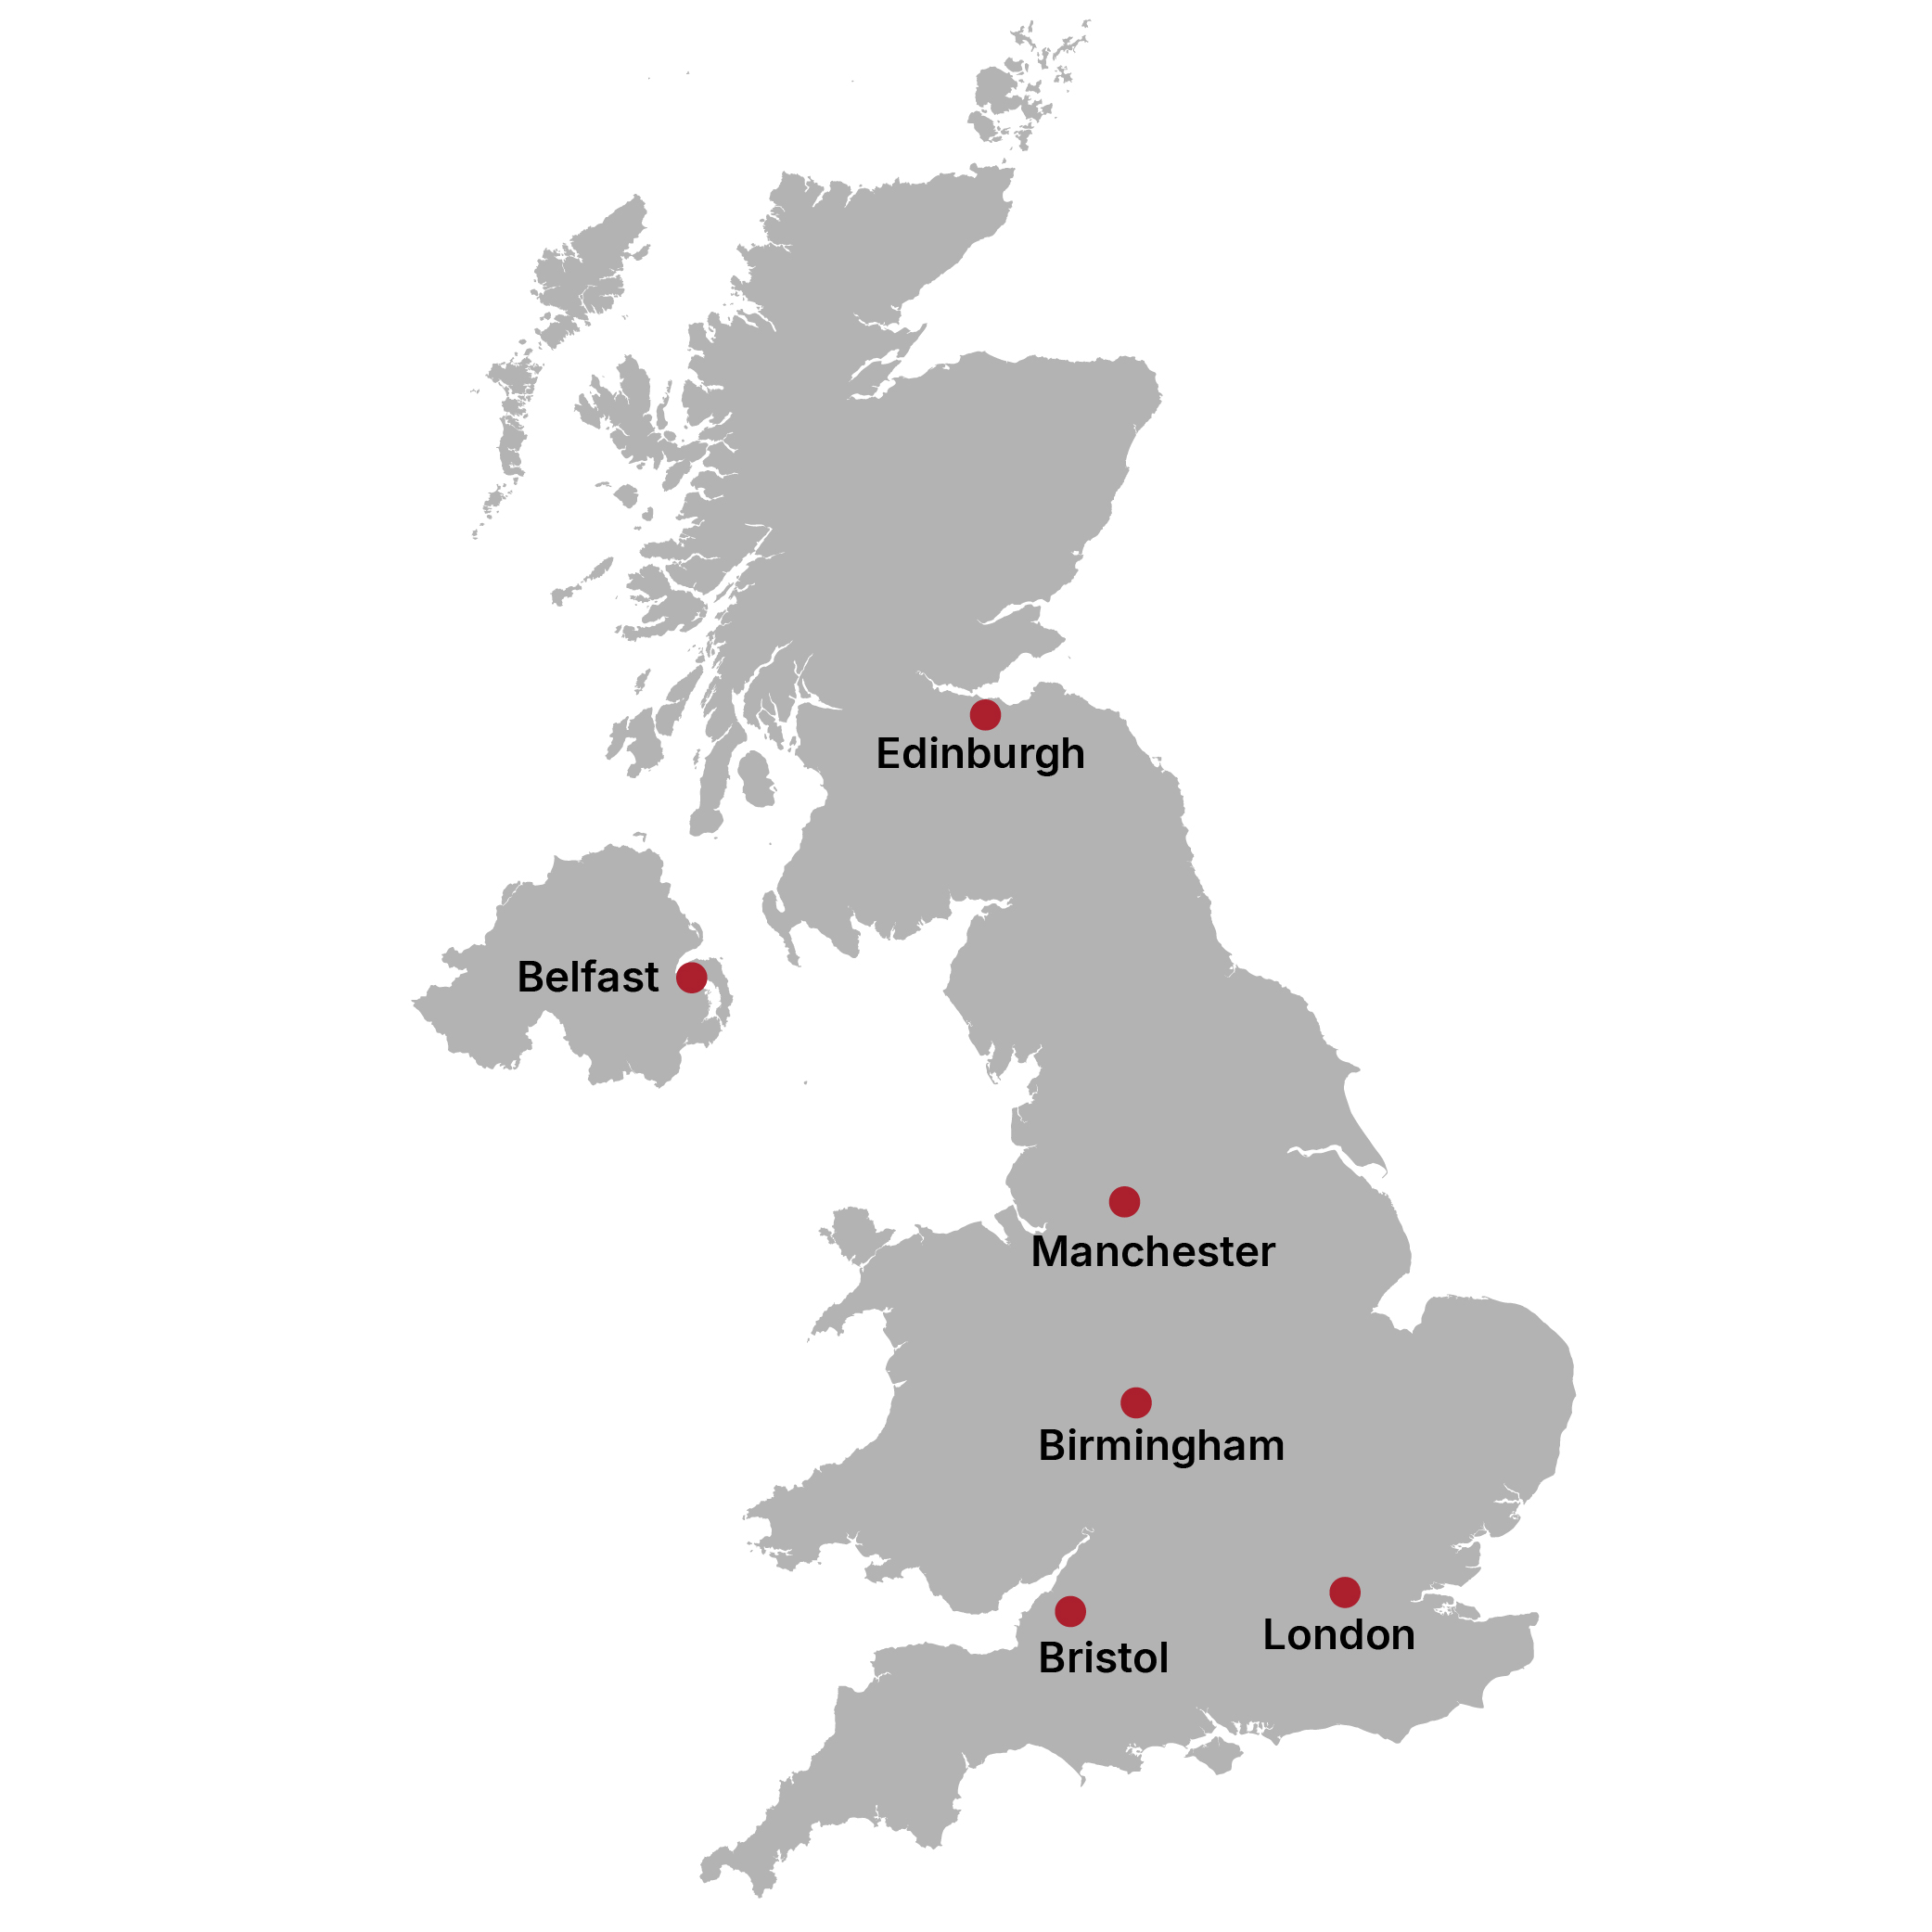 A simple red map of the UK with several cities indicated